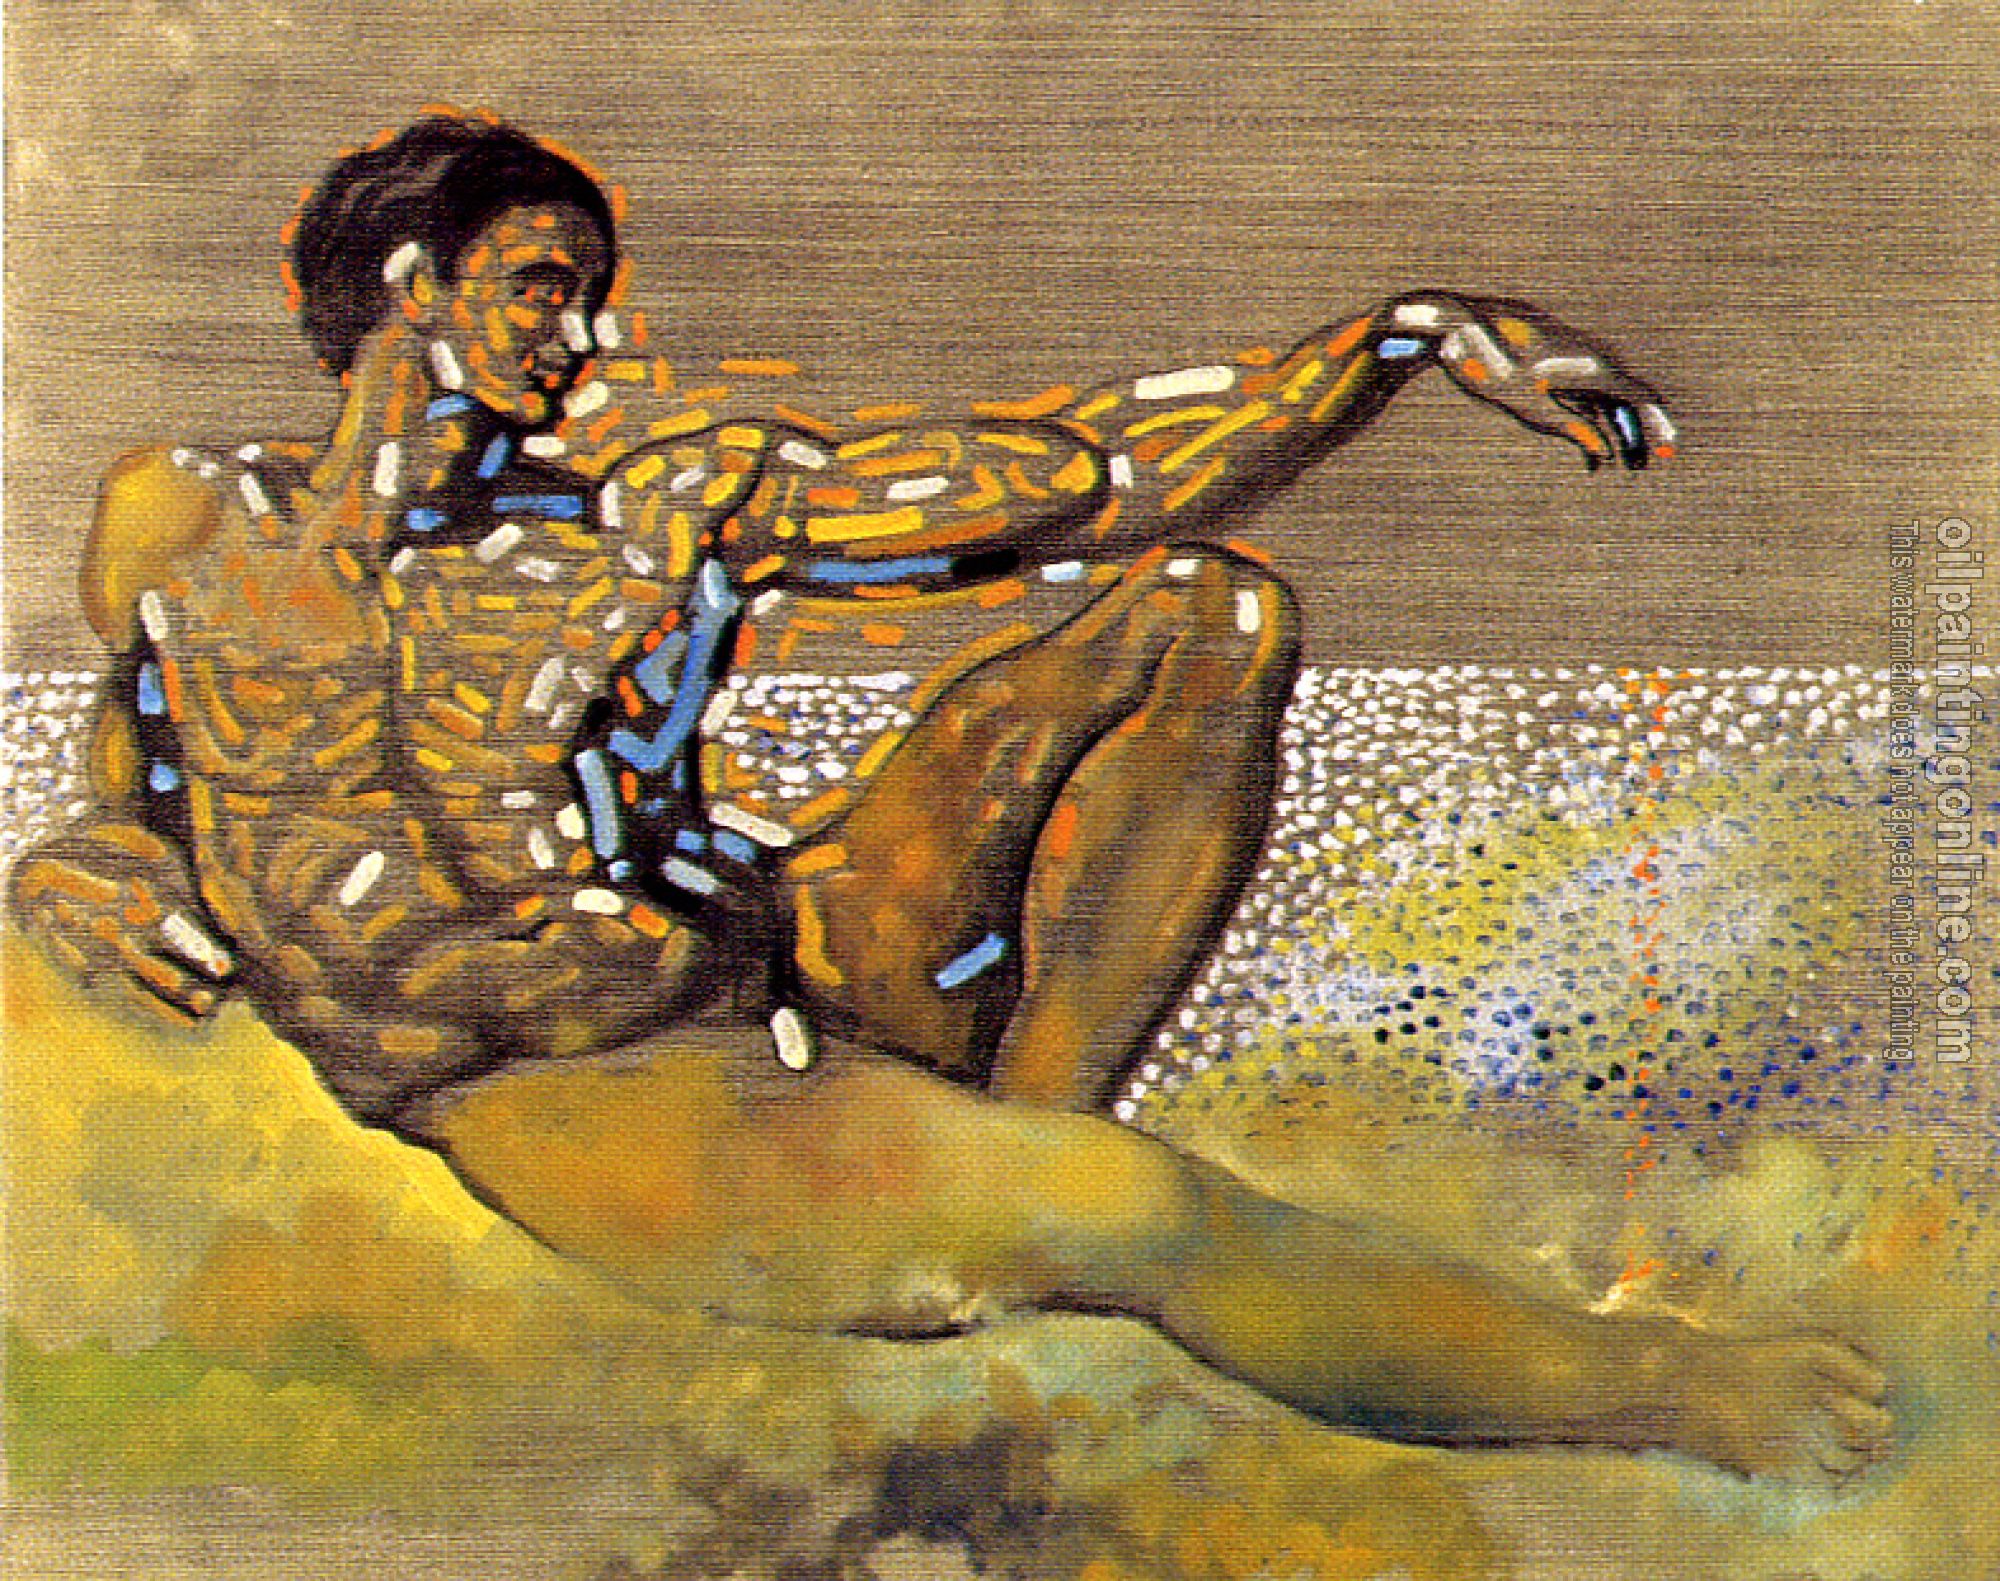 Dali, Salvador - Figure Inspired by Michelangelo's Adam on the Ceiling of the Sistine Chapel,Rome